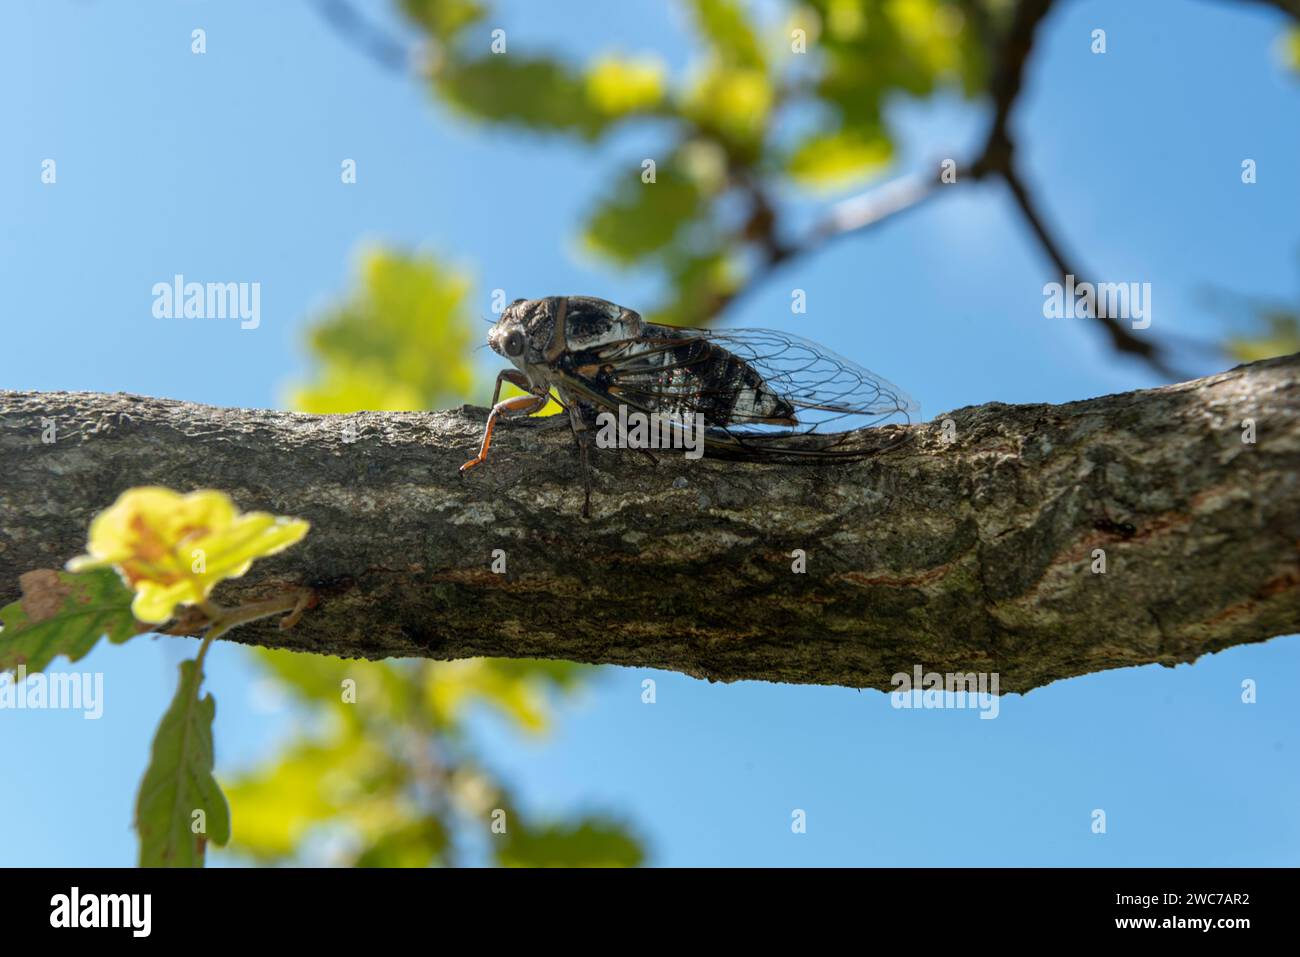 Close up view of a cicada on an oak tree Stock Photo